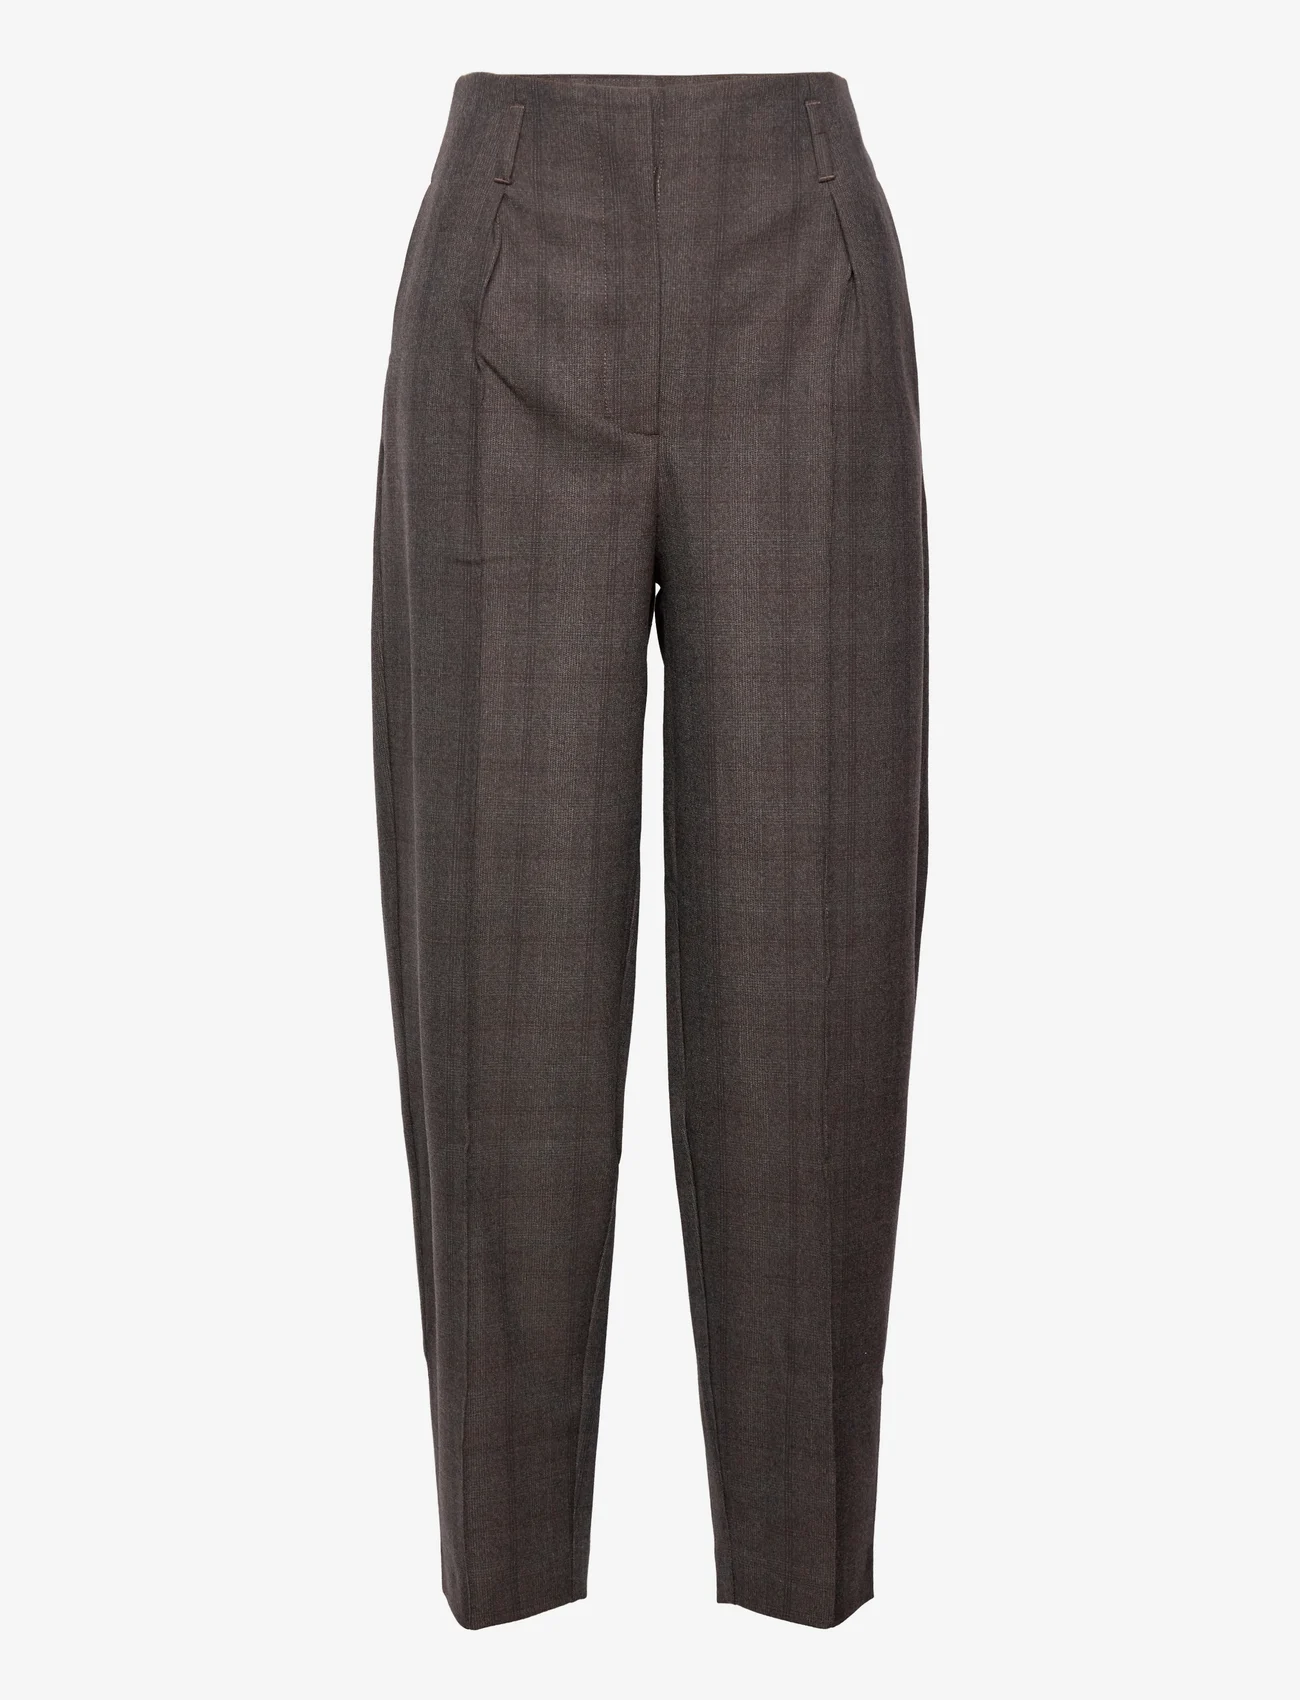 FIVEUNITS - Hailey - tailored trousers - brown check - 0